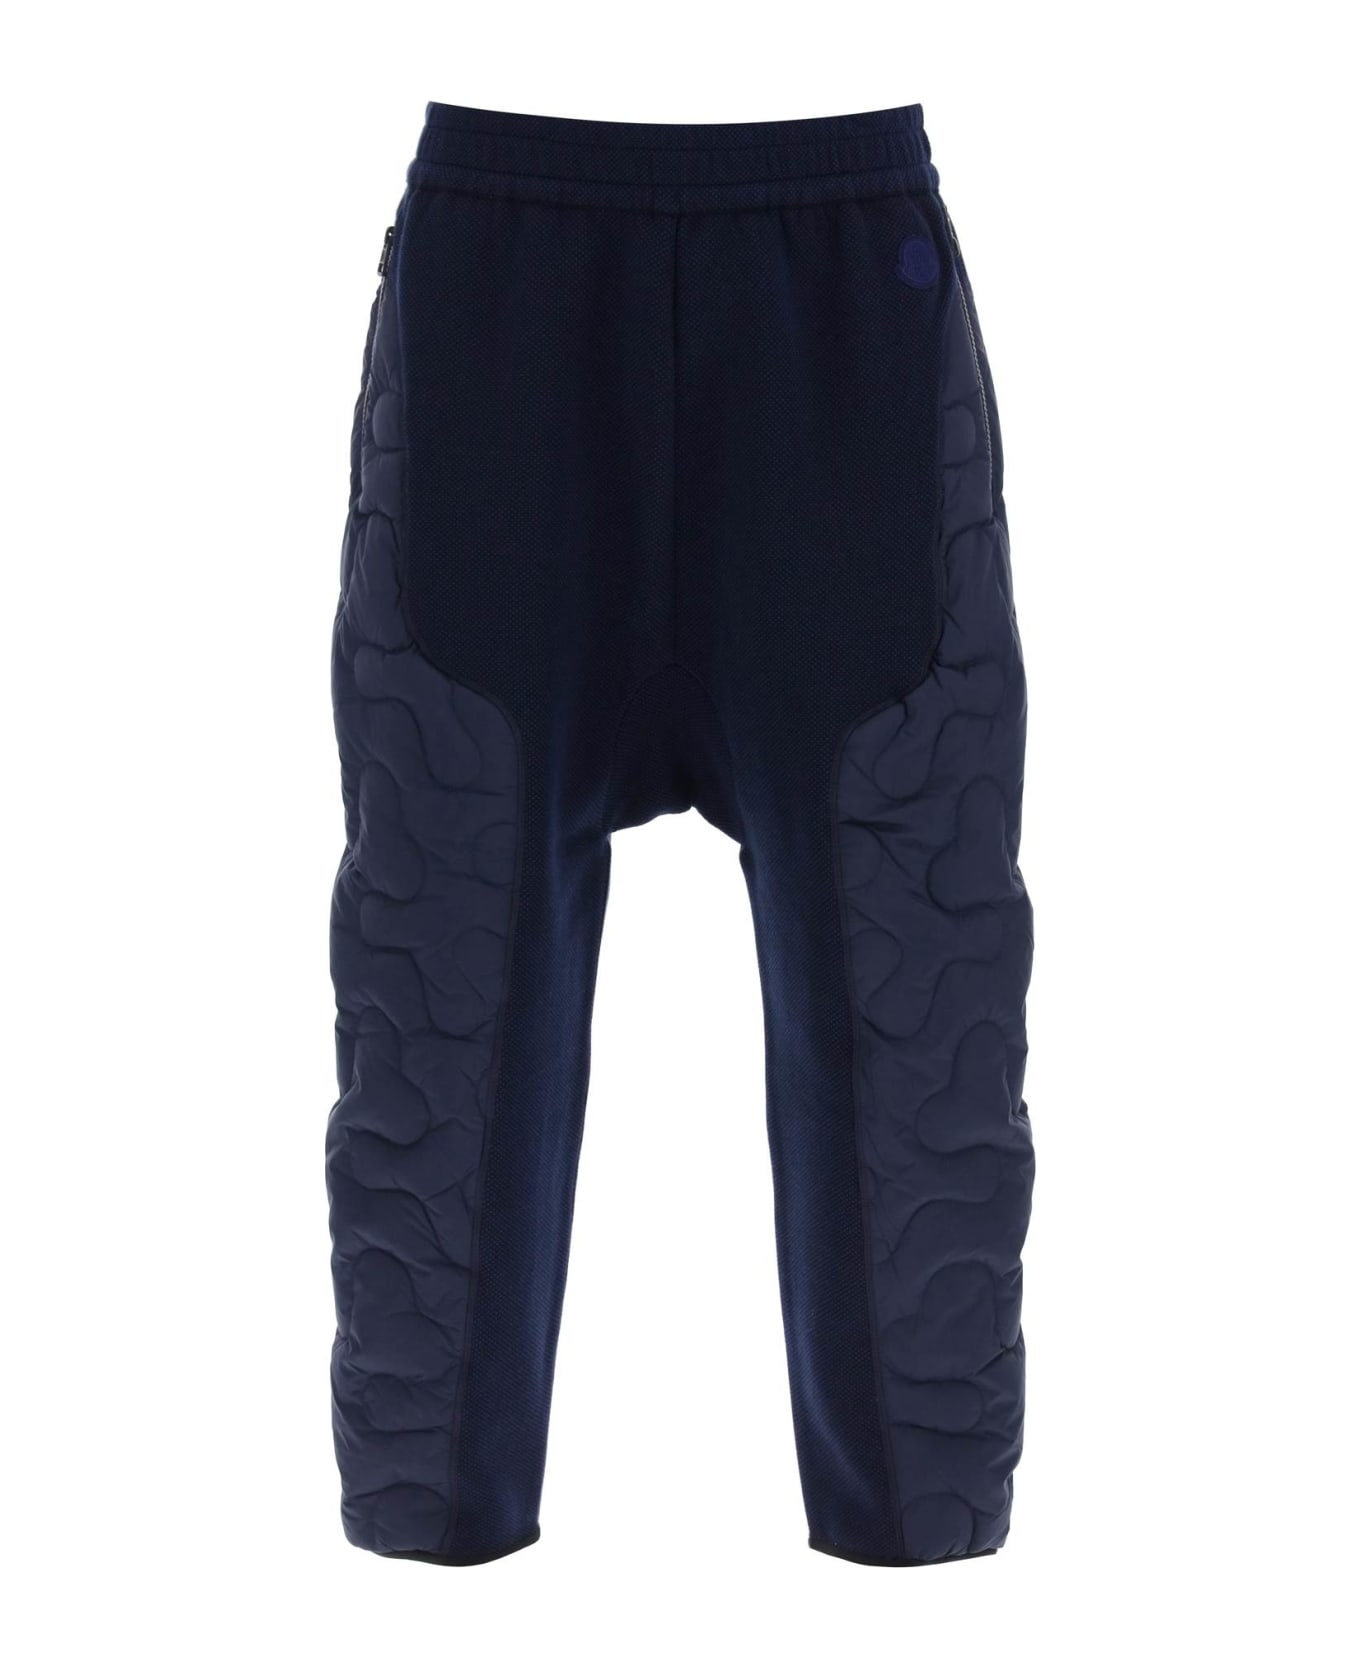 Moncler Genius Padded Trousers - Blue ボトムス